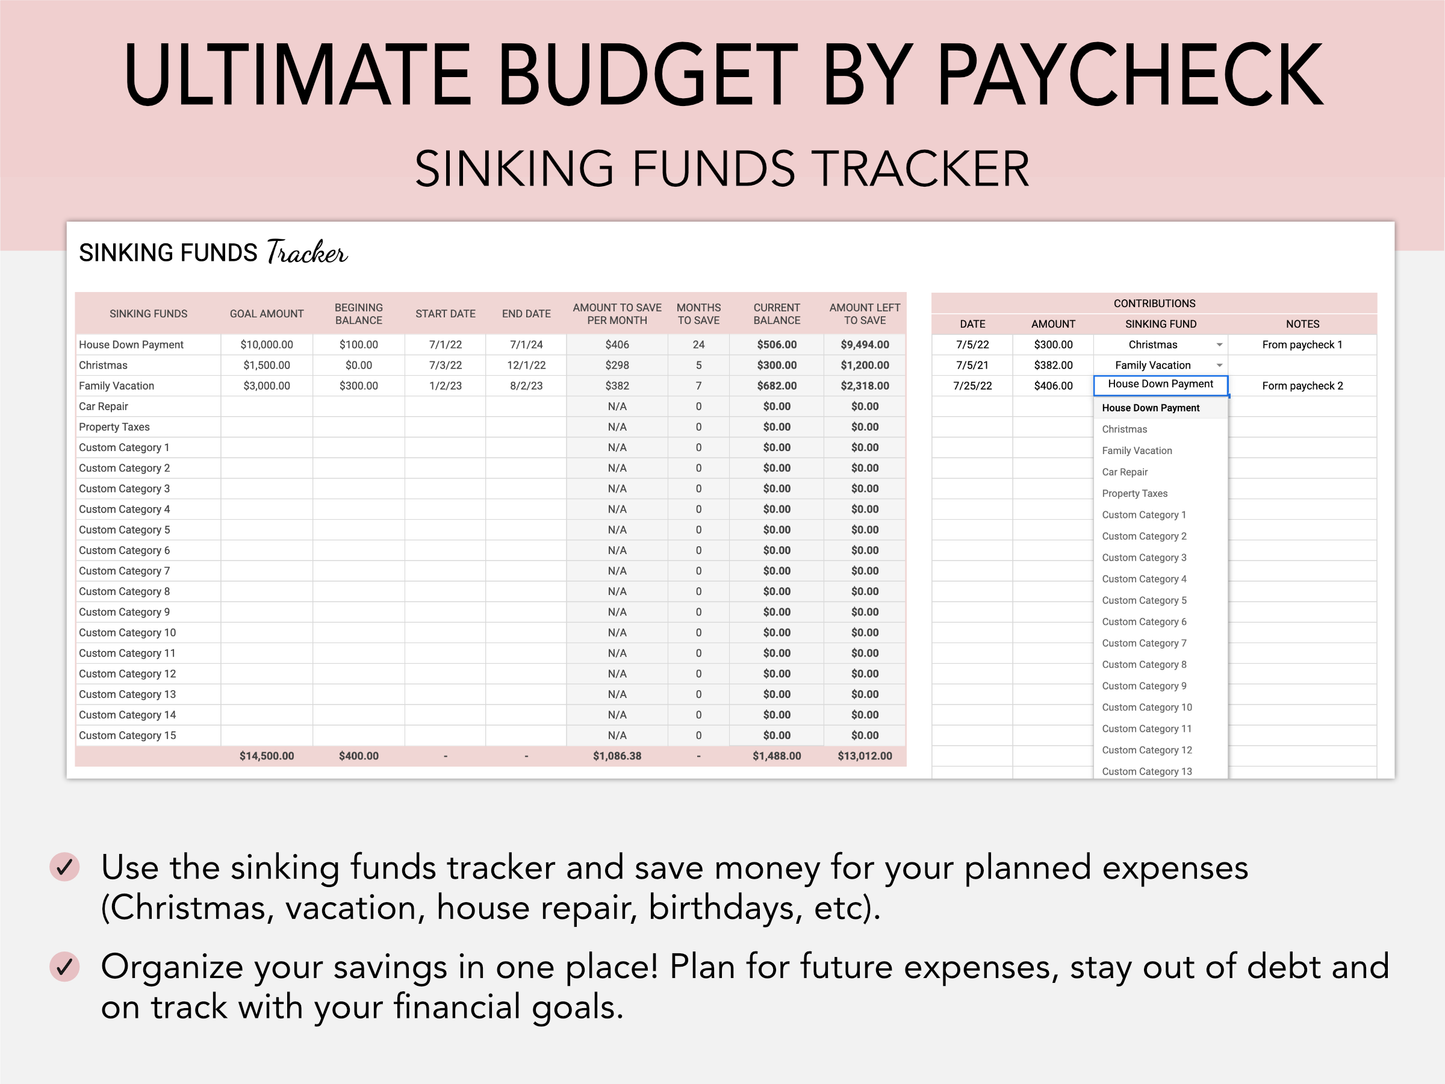 Ultimate Budget By Paycheck - Financial Tracker for Bi-weekly or Weekly Budget